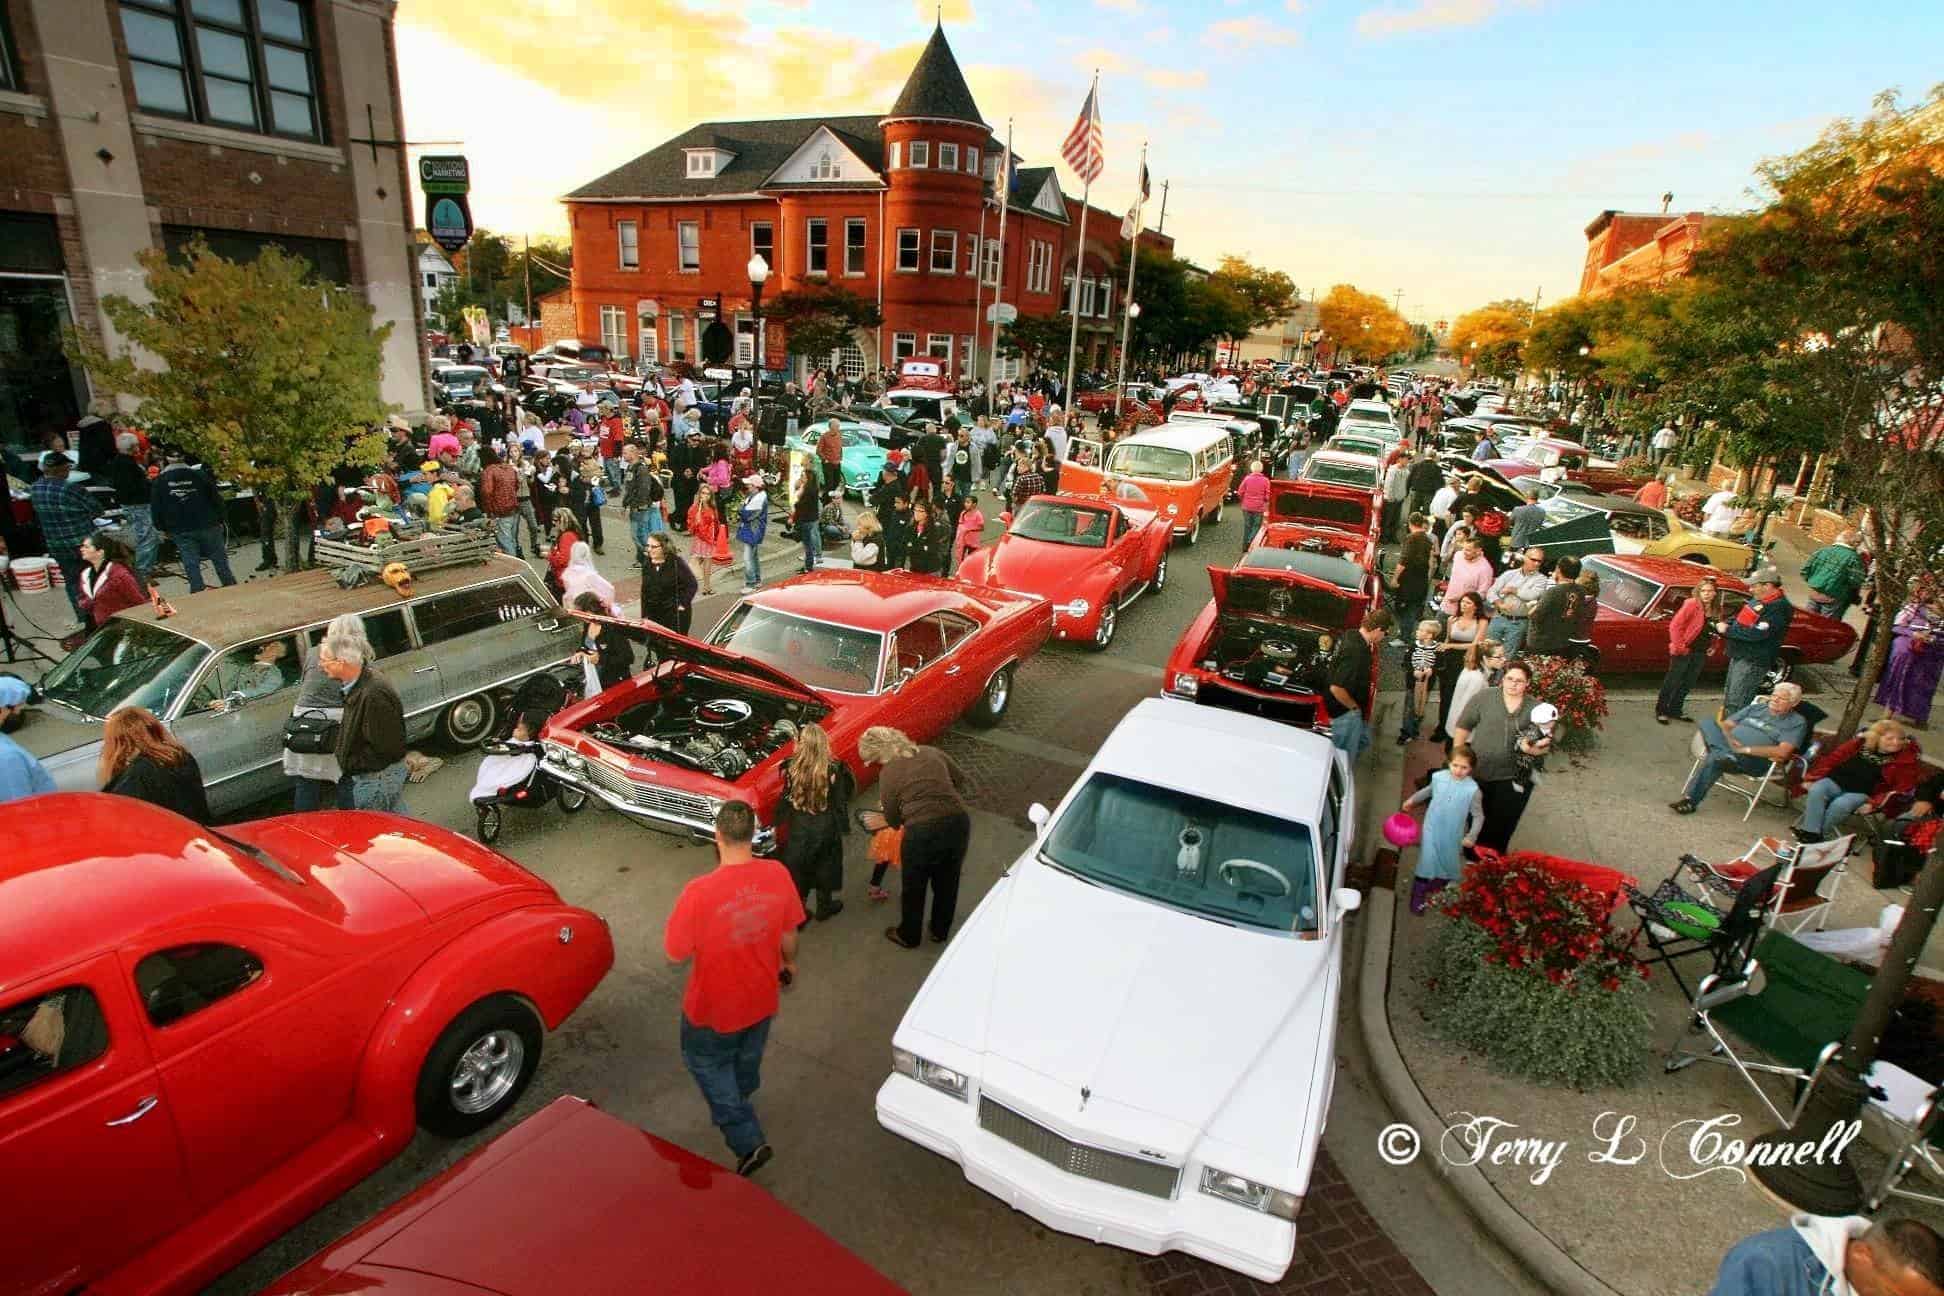 Local Photographer took this shot of the Halloween Holly Car Show, look at all the kids trick or treating!